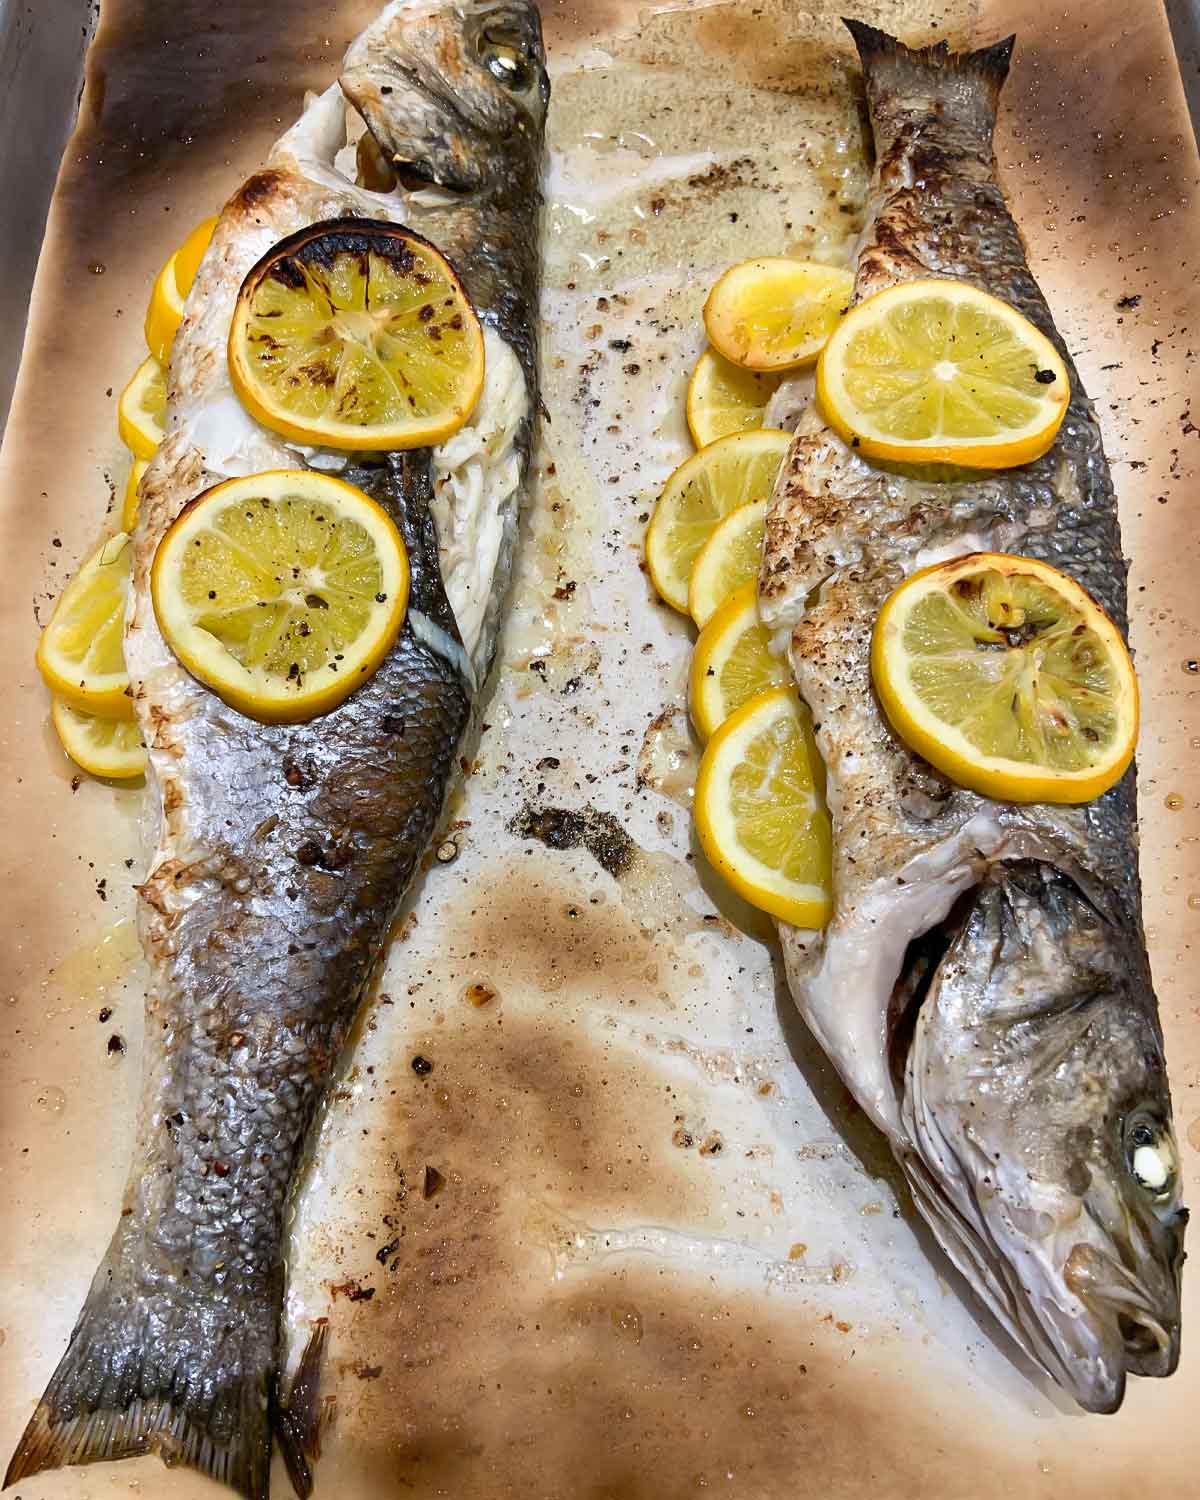 Two whole roasted branzino with lemon and shaved fennel salad on a parchment-lined baking sheet.